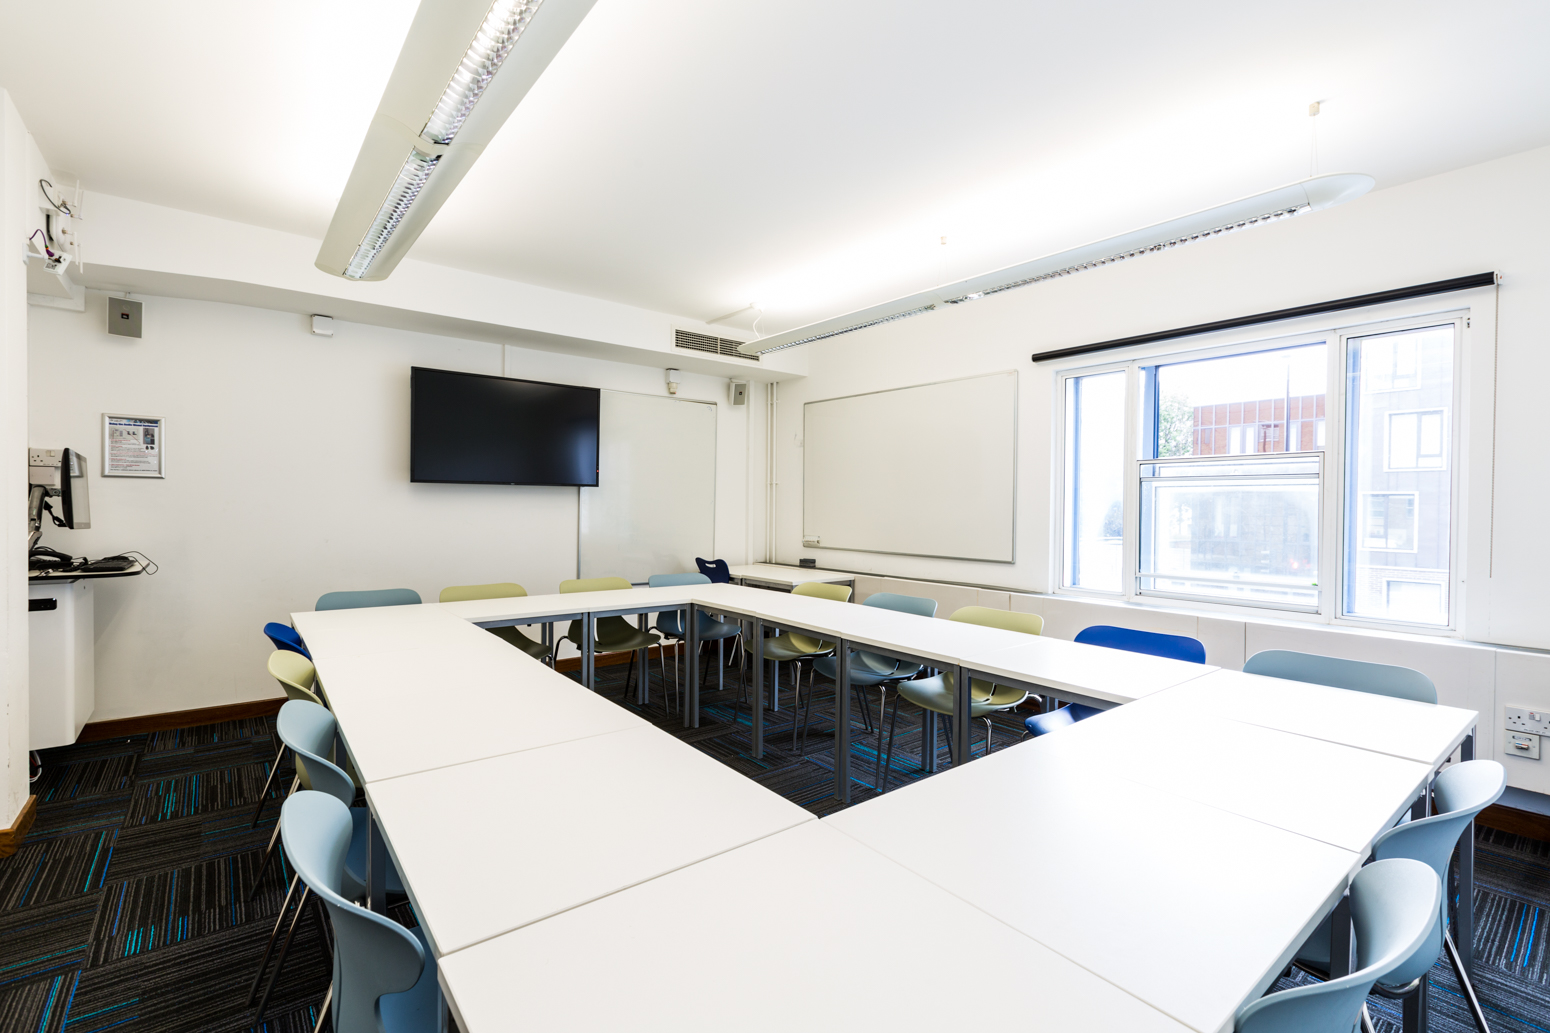 Queen Mary University of London - Classroom